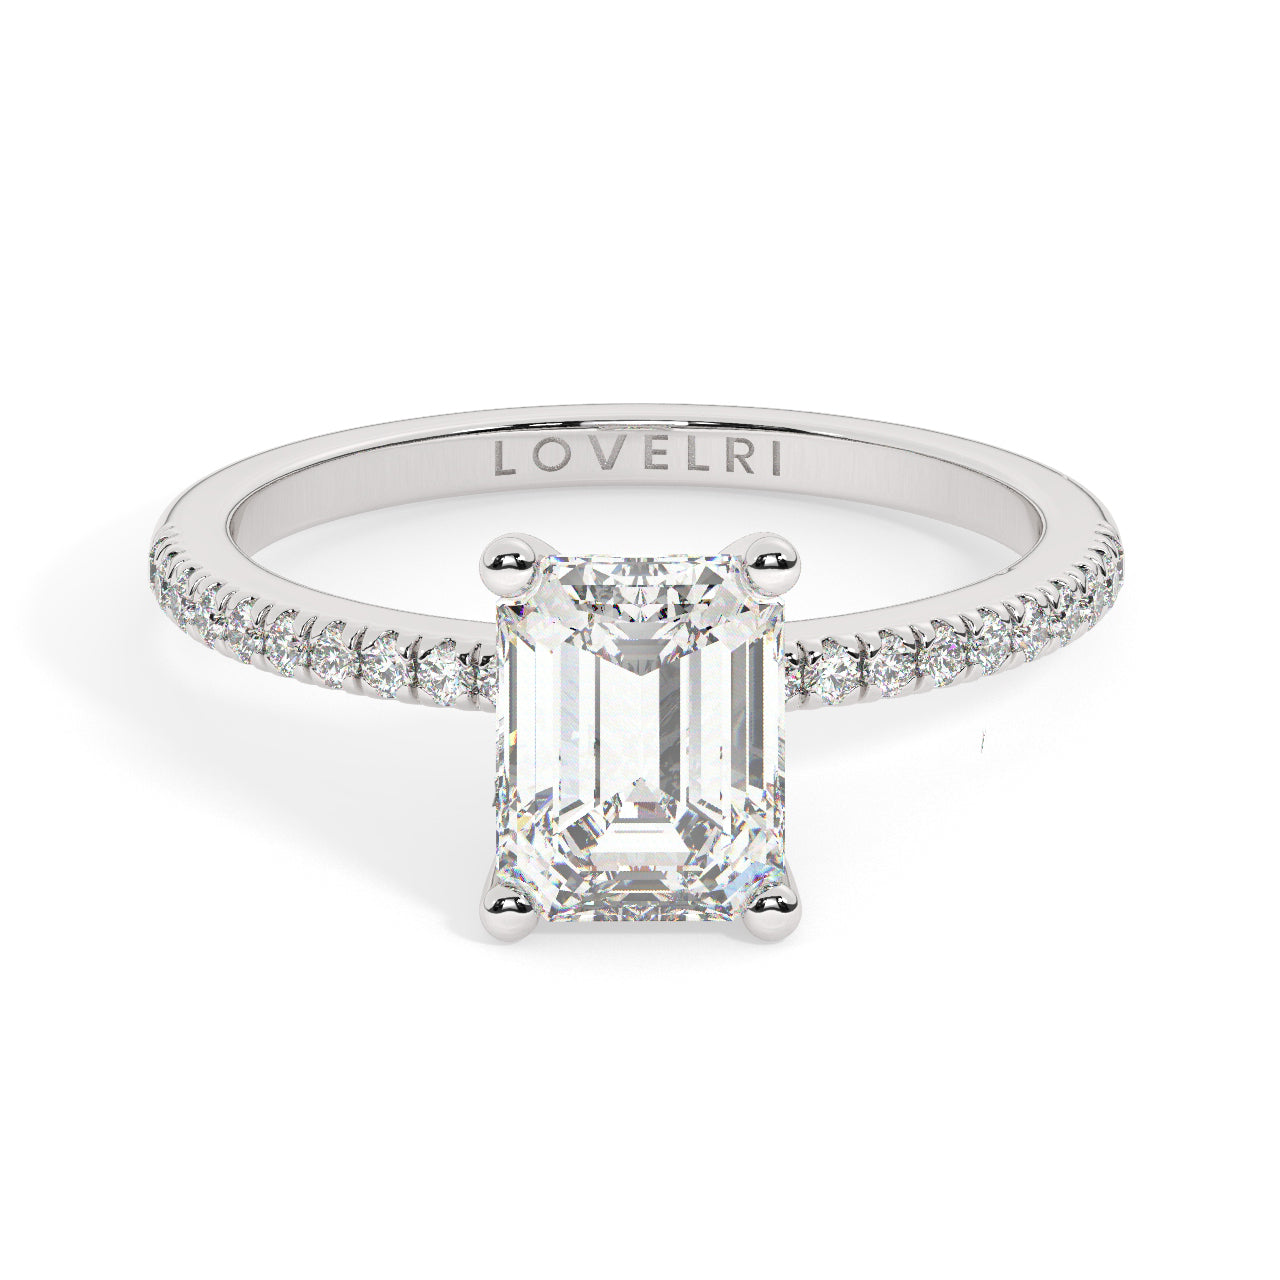 White Gold Emerald Cut Engagement Ring set on a Pavé Band